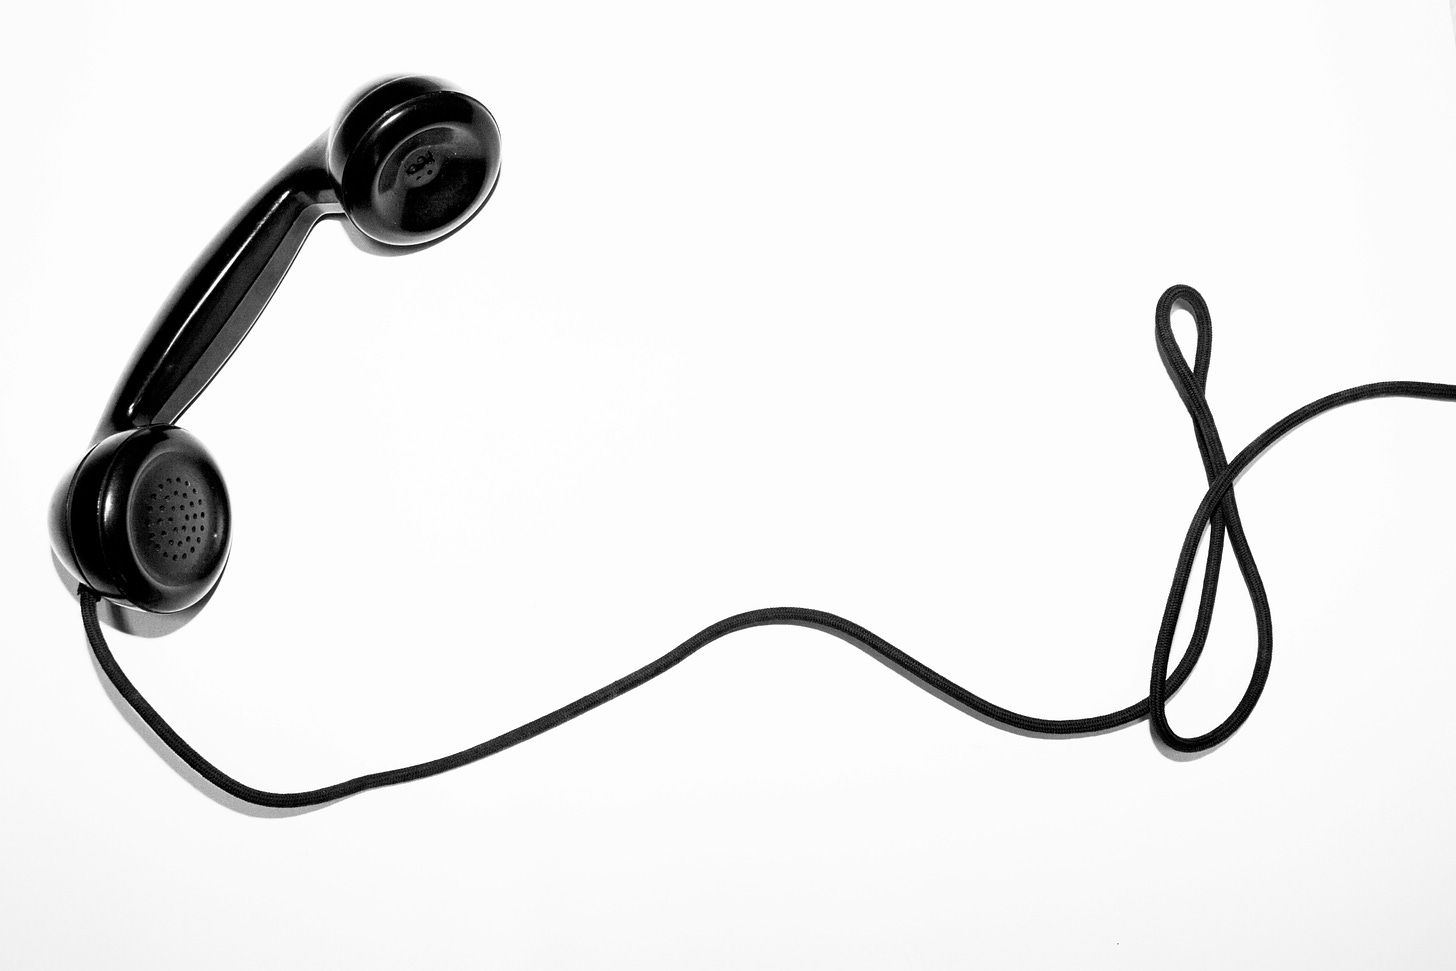 Black phone headset with winding cord on white background